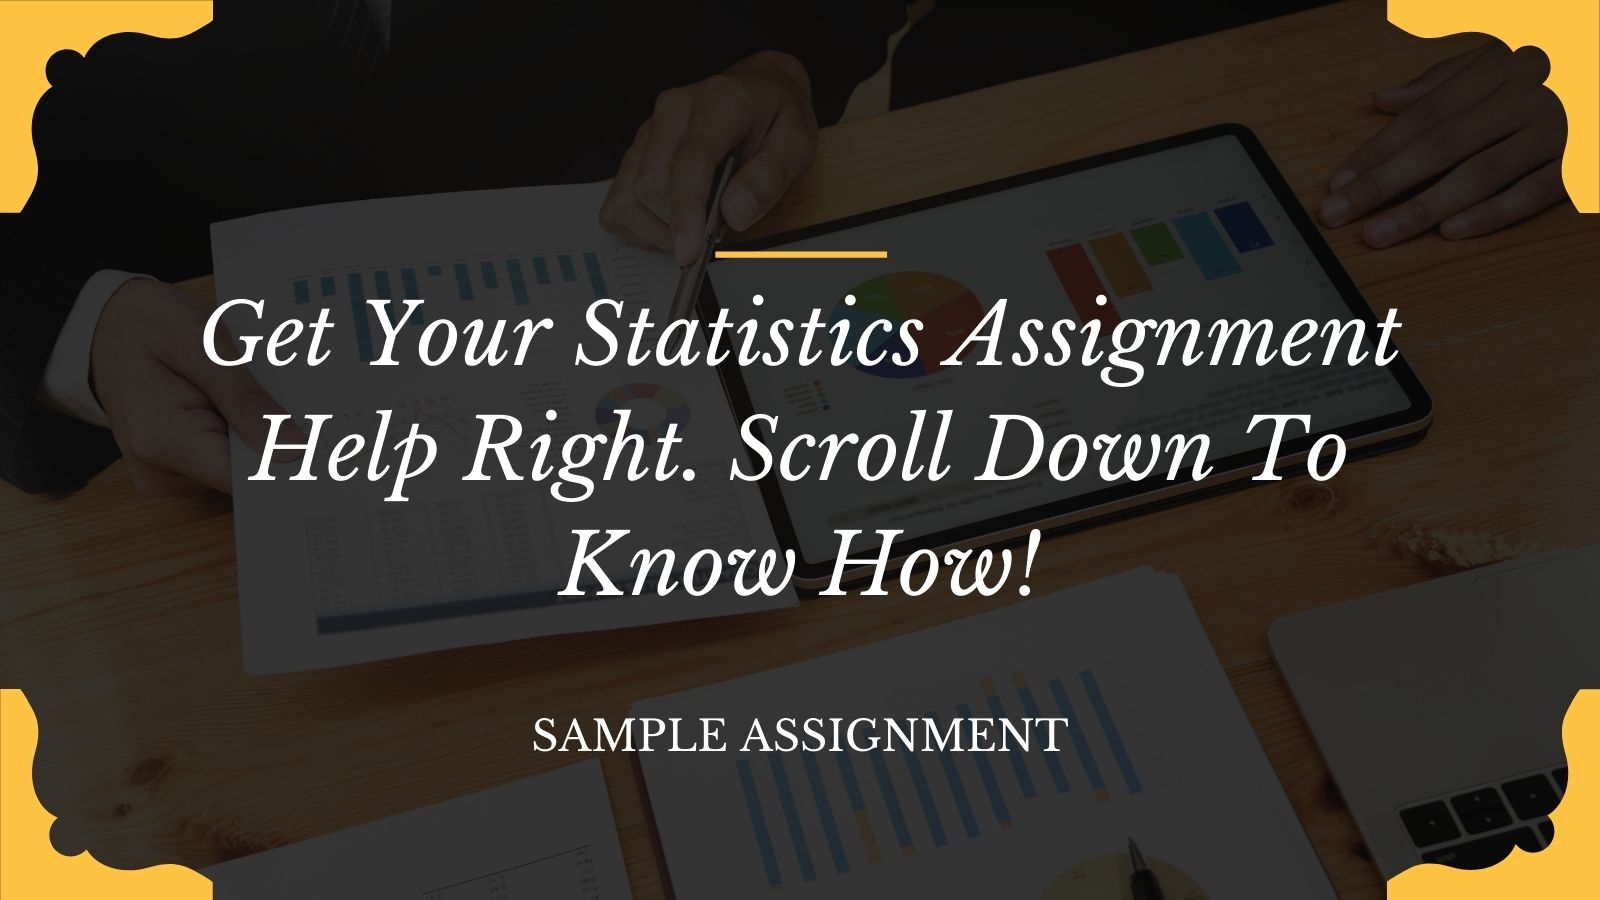 Get Your Statistics Assignment Help Right. Scroll Down To Know How!